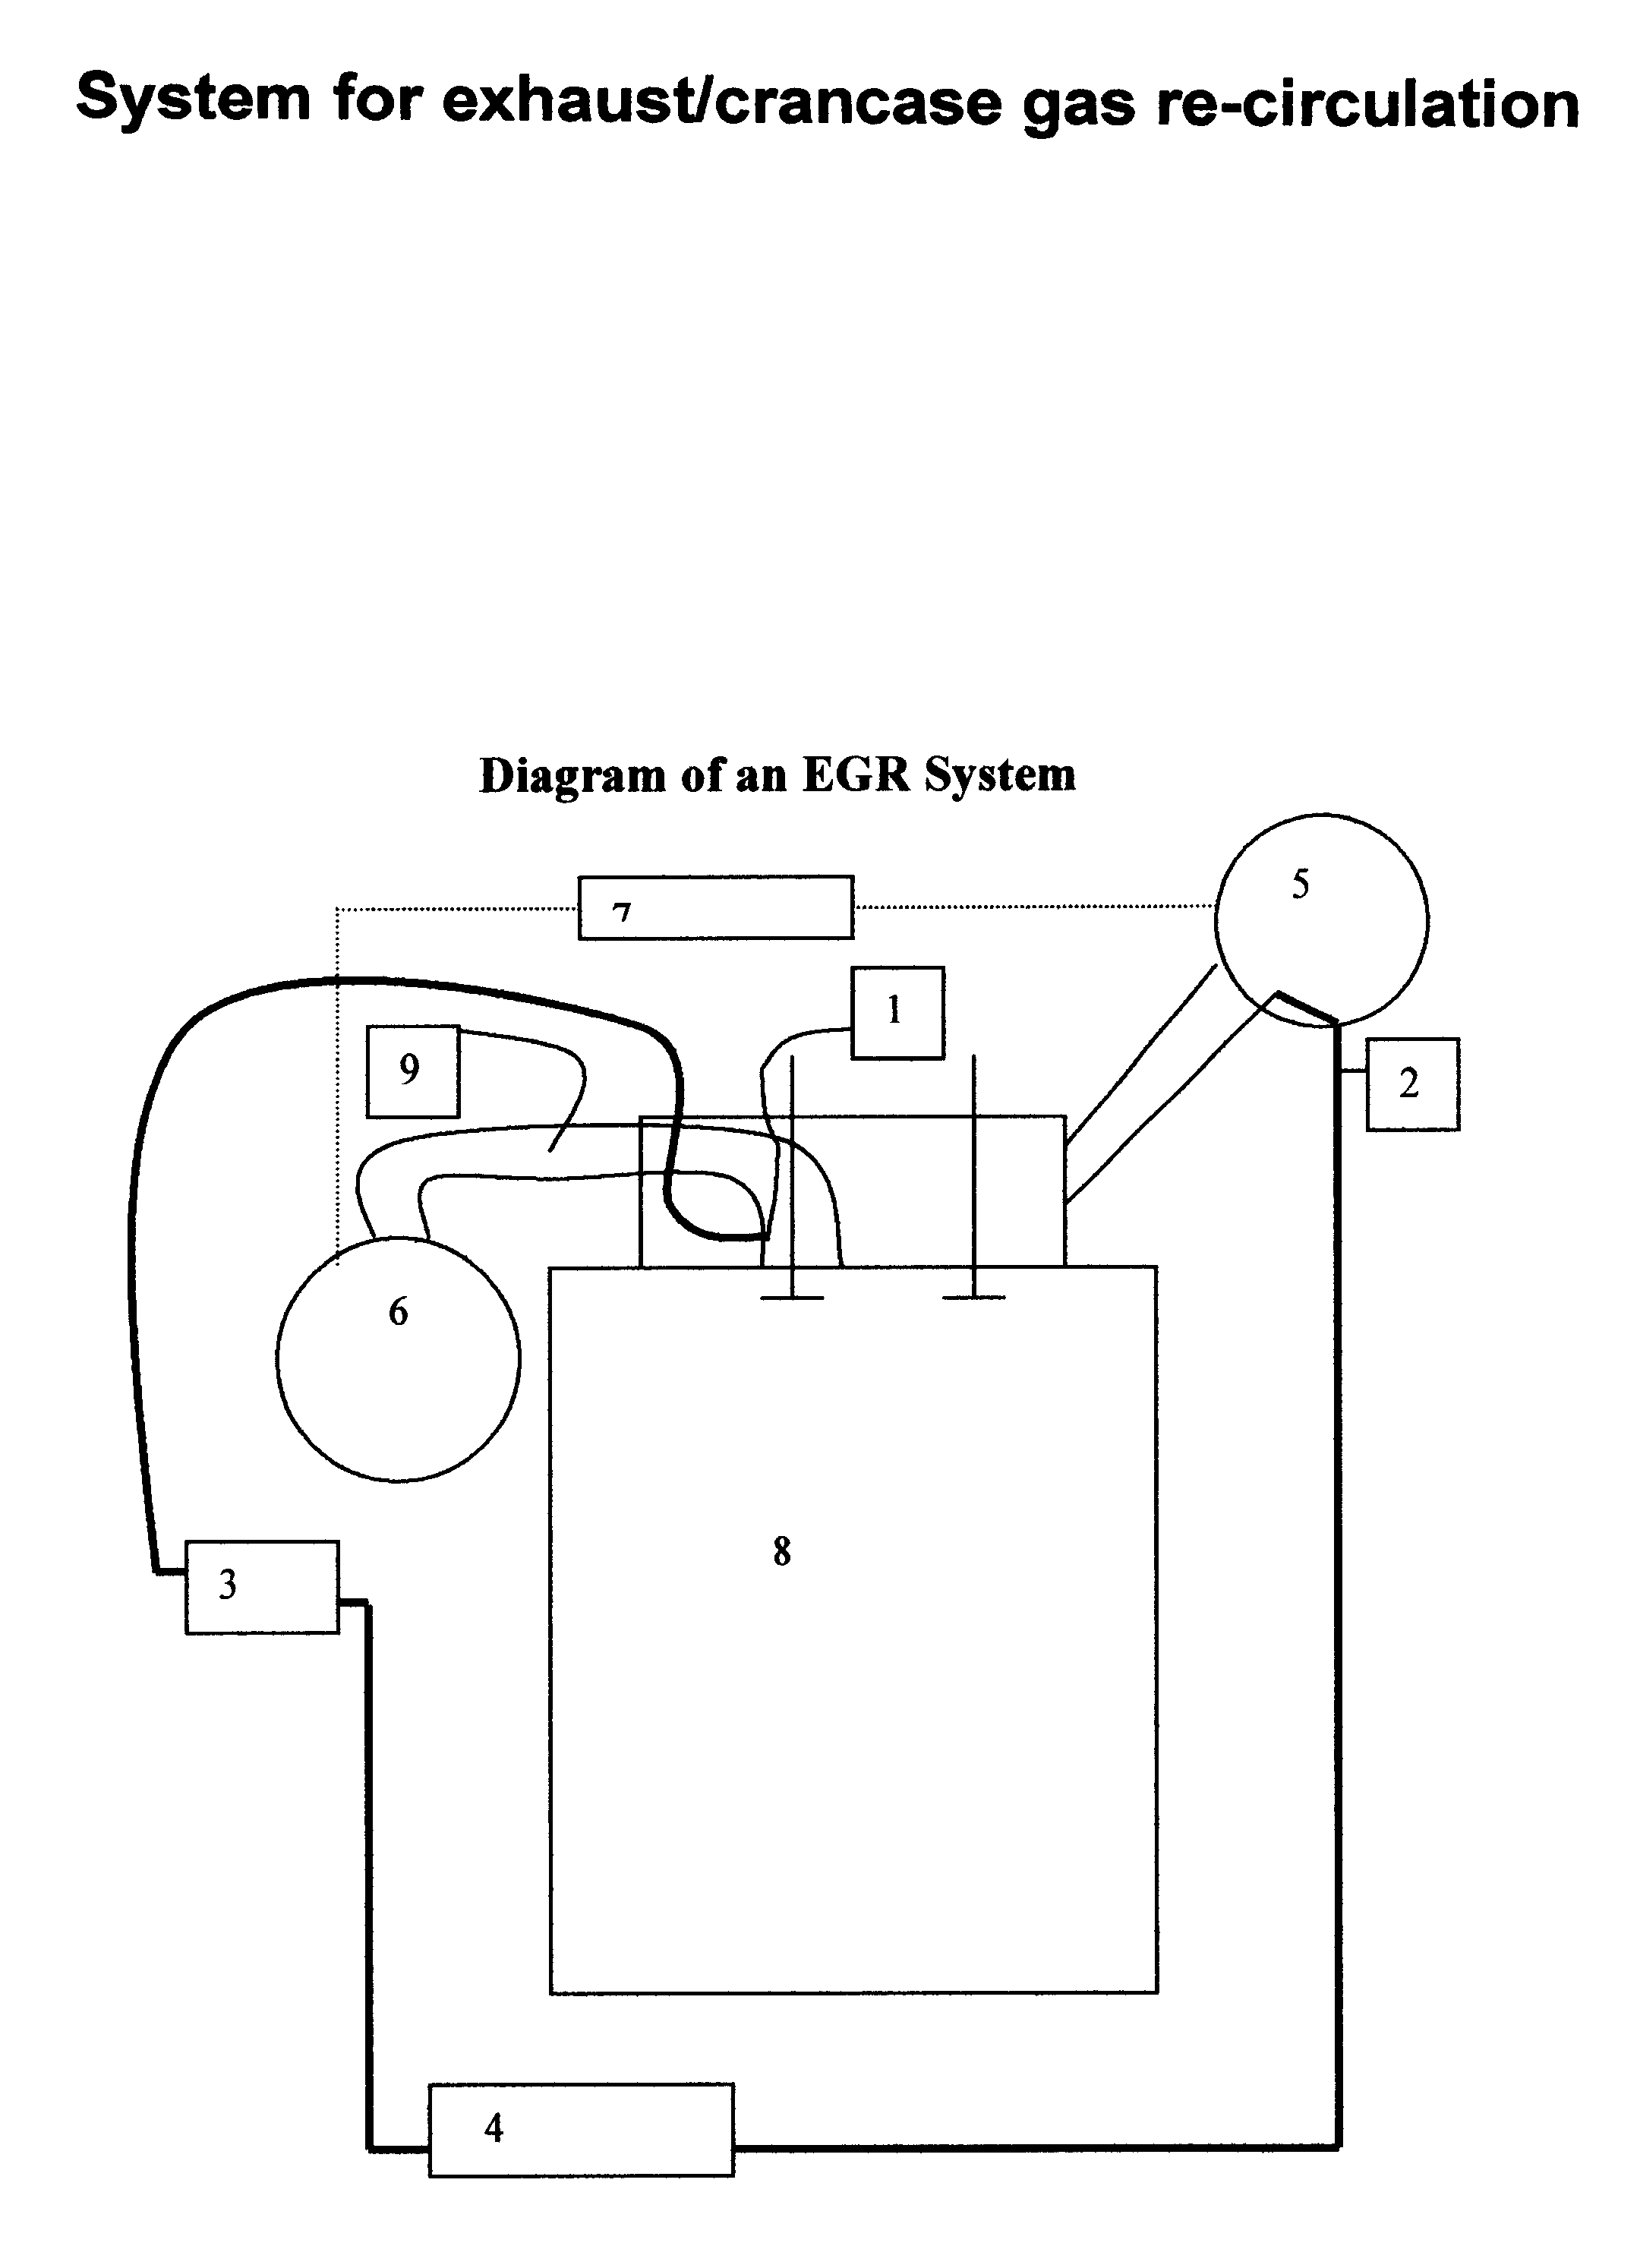 System for exhaust/crankcase gas recirculation